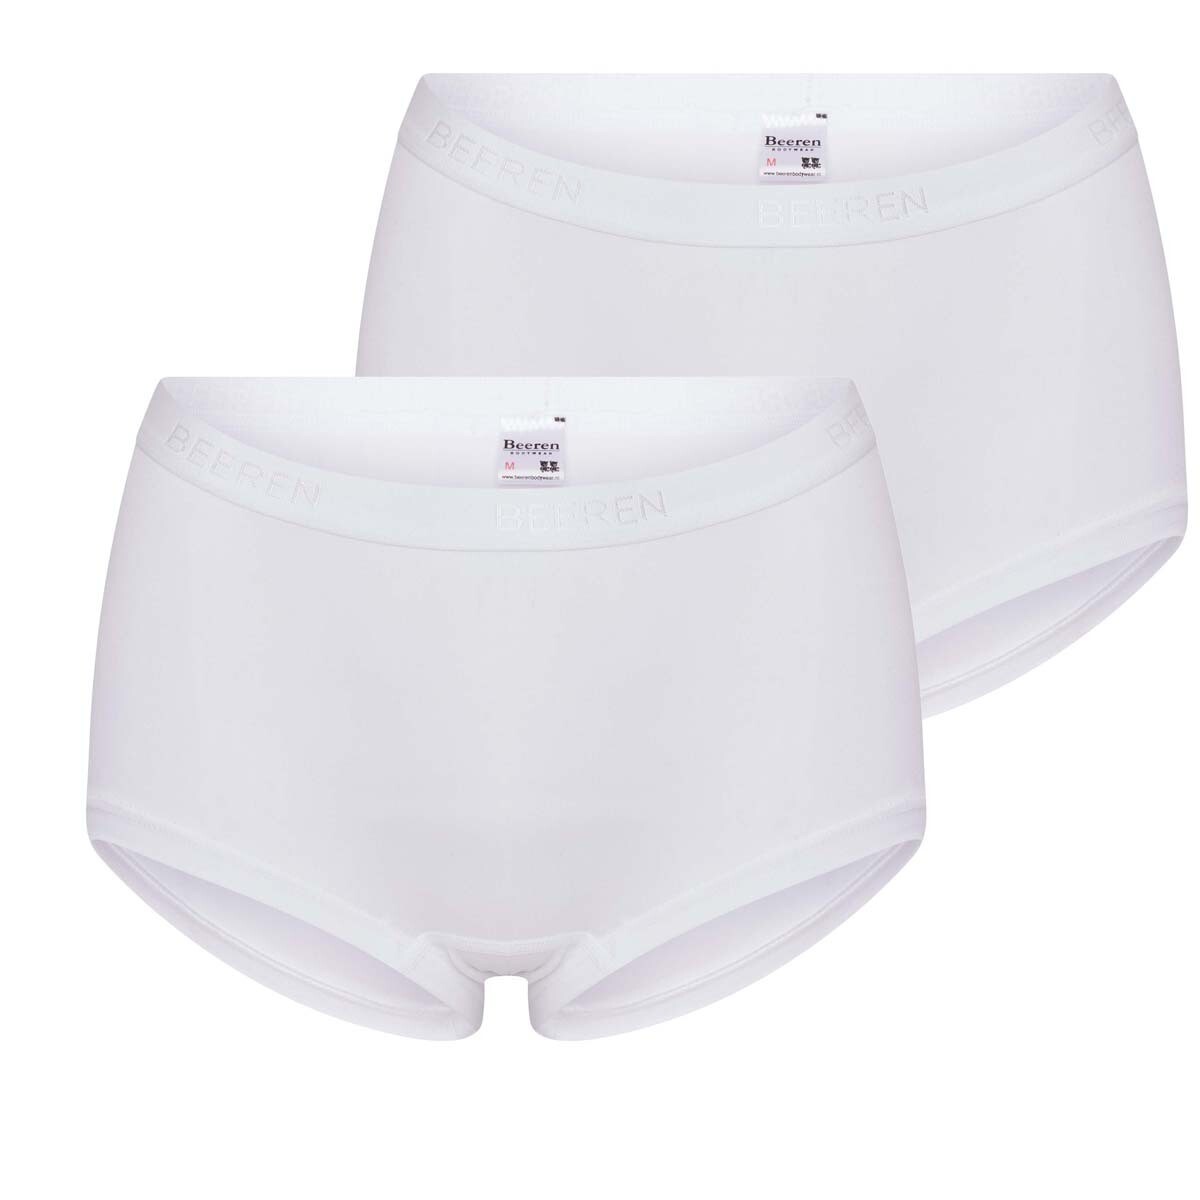 (16-415) Dames short 2-pack Young wit M